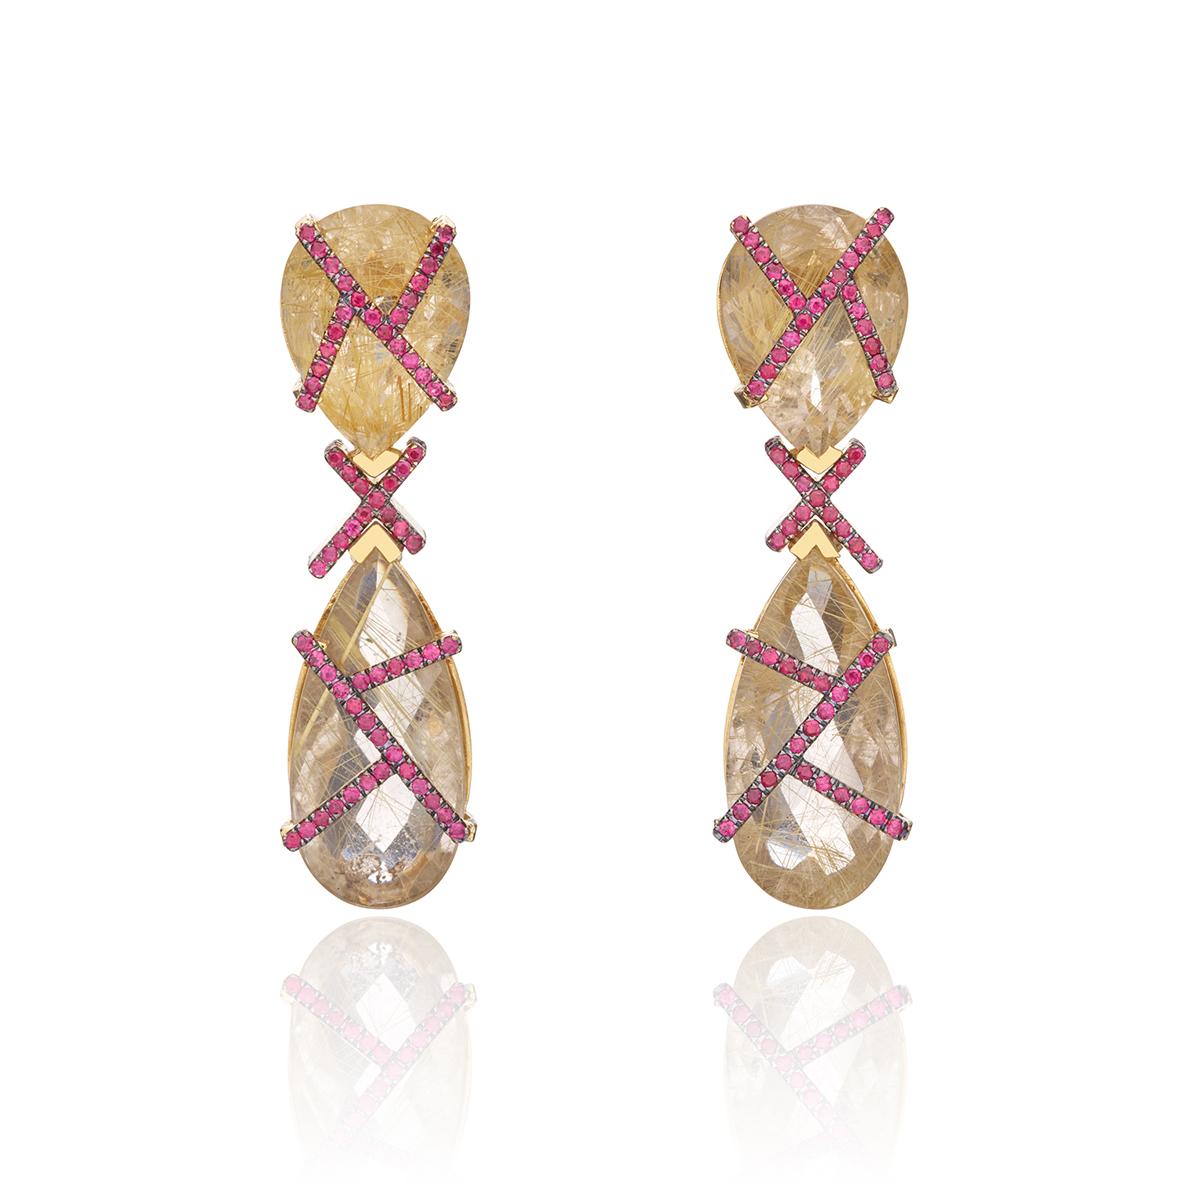 A masterpiece on your ears. Earrings in 18Kt yellow gold with embire rutilated quartz and rubies. A statement piece of jewelry that gives unique and unforgettable style to your outfitt.
KARMA  Nicofilimon  2015

The 